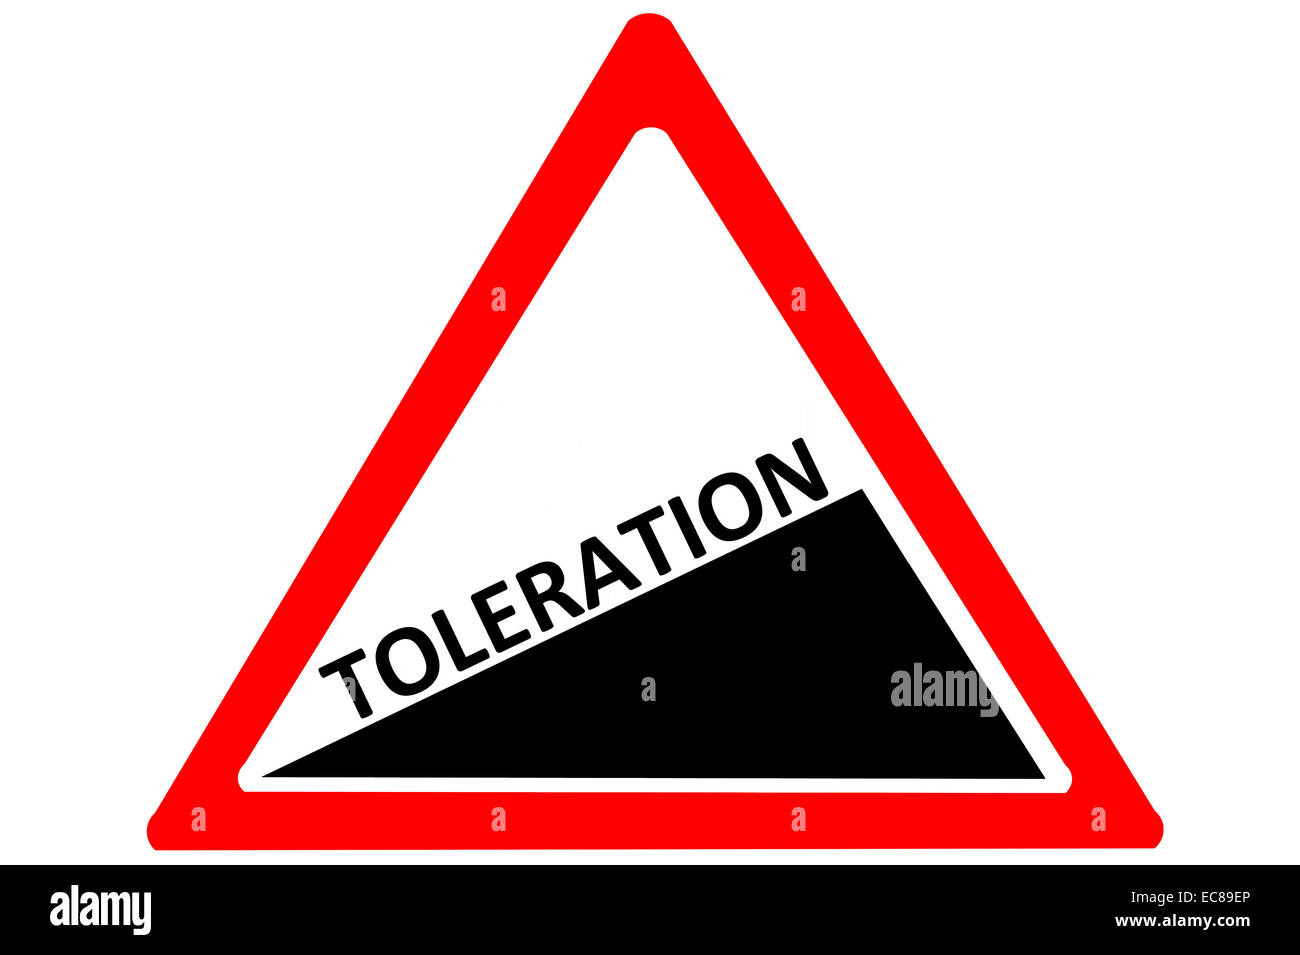 Toleration increasing warning road sign isolated on pure white background Stock Photo